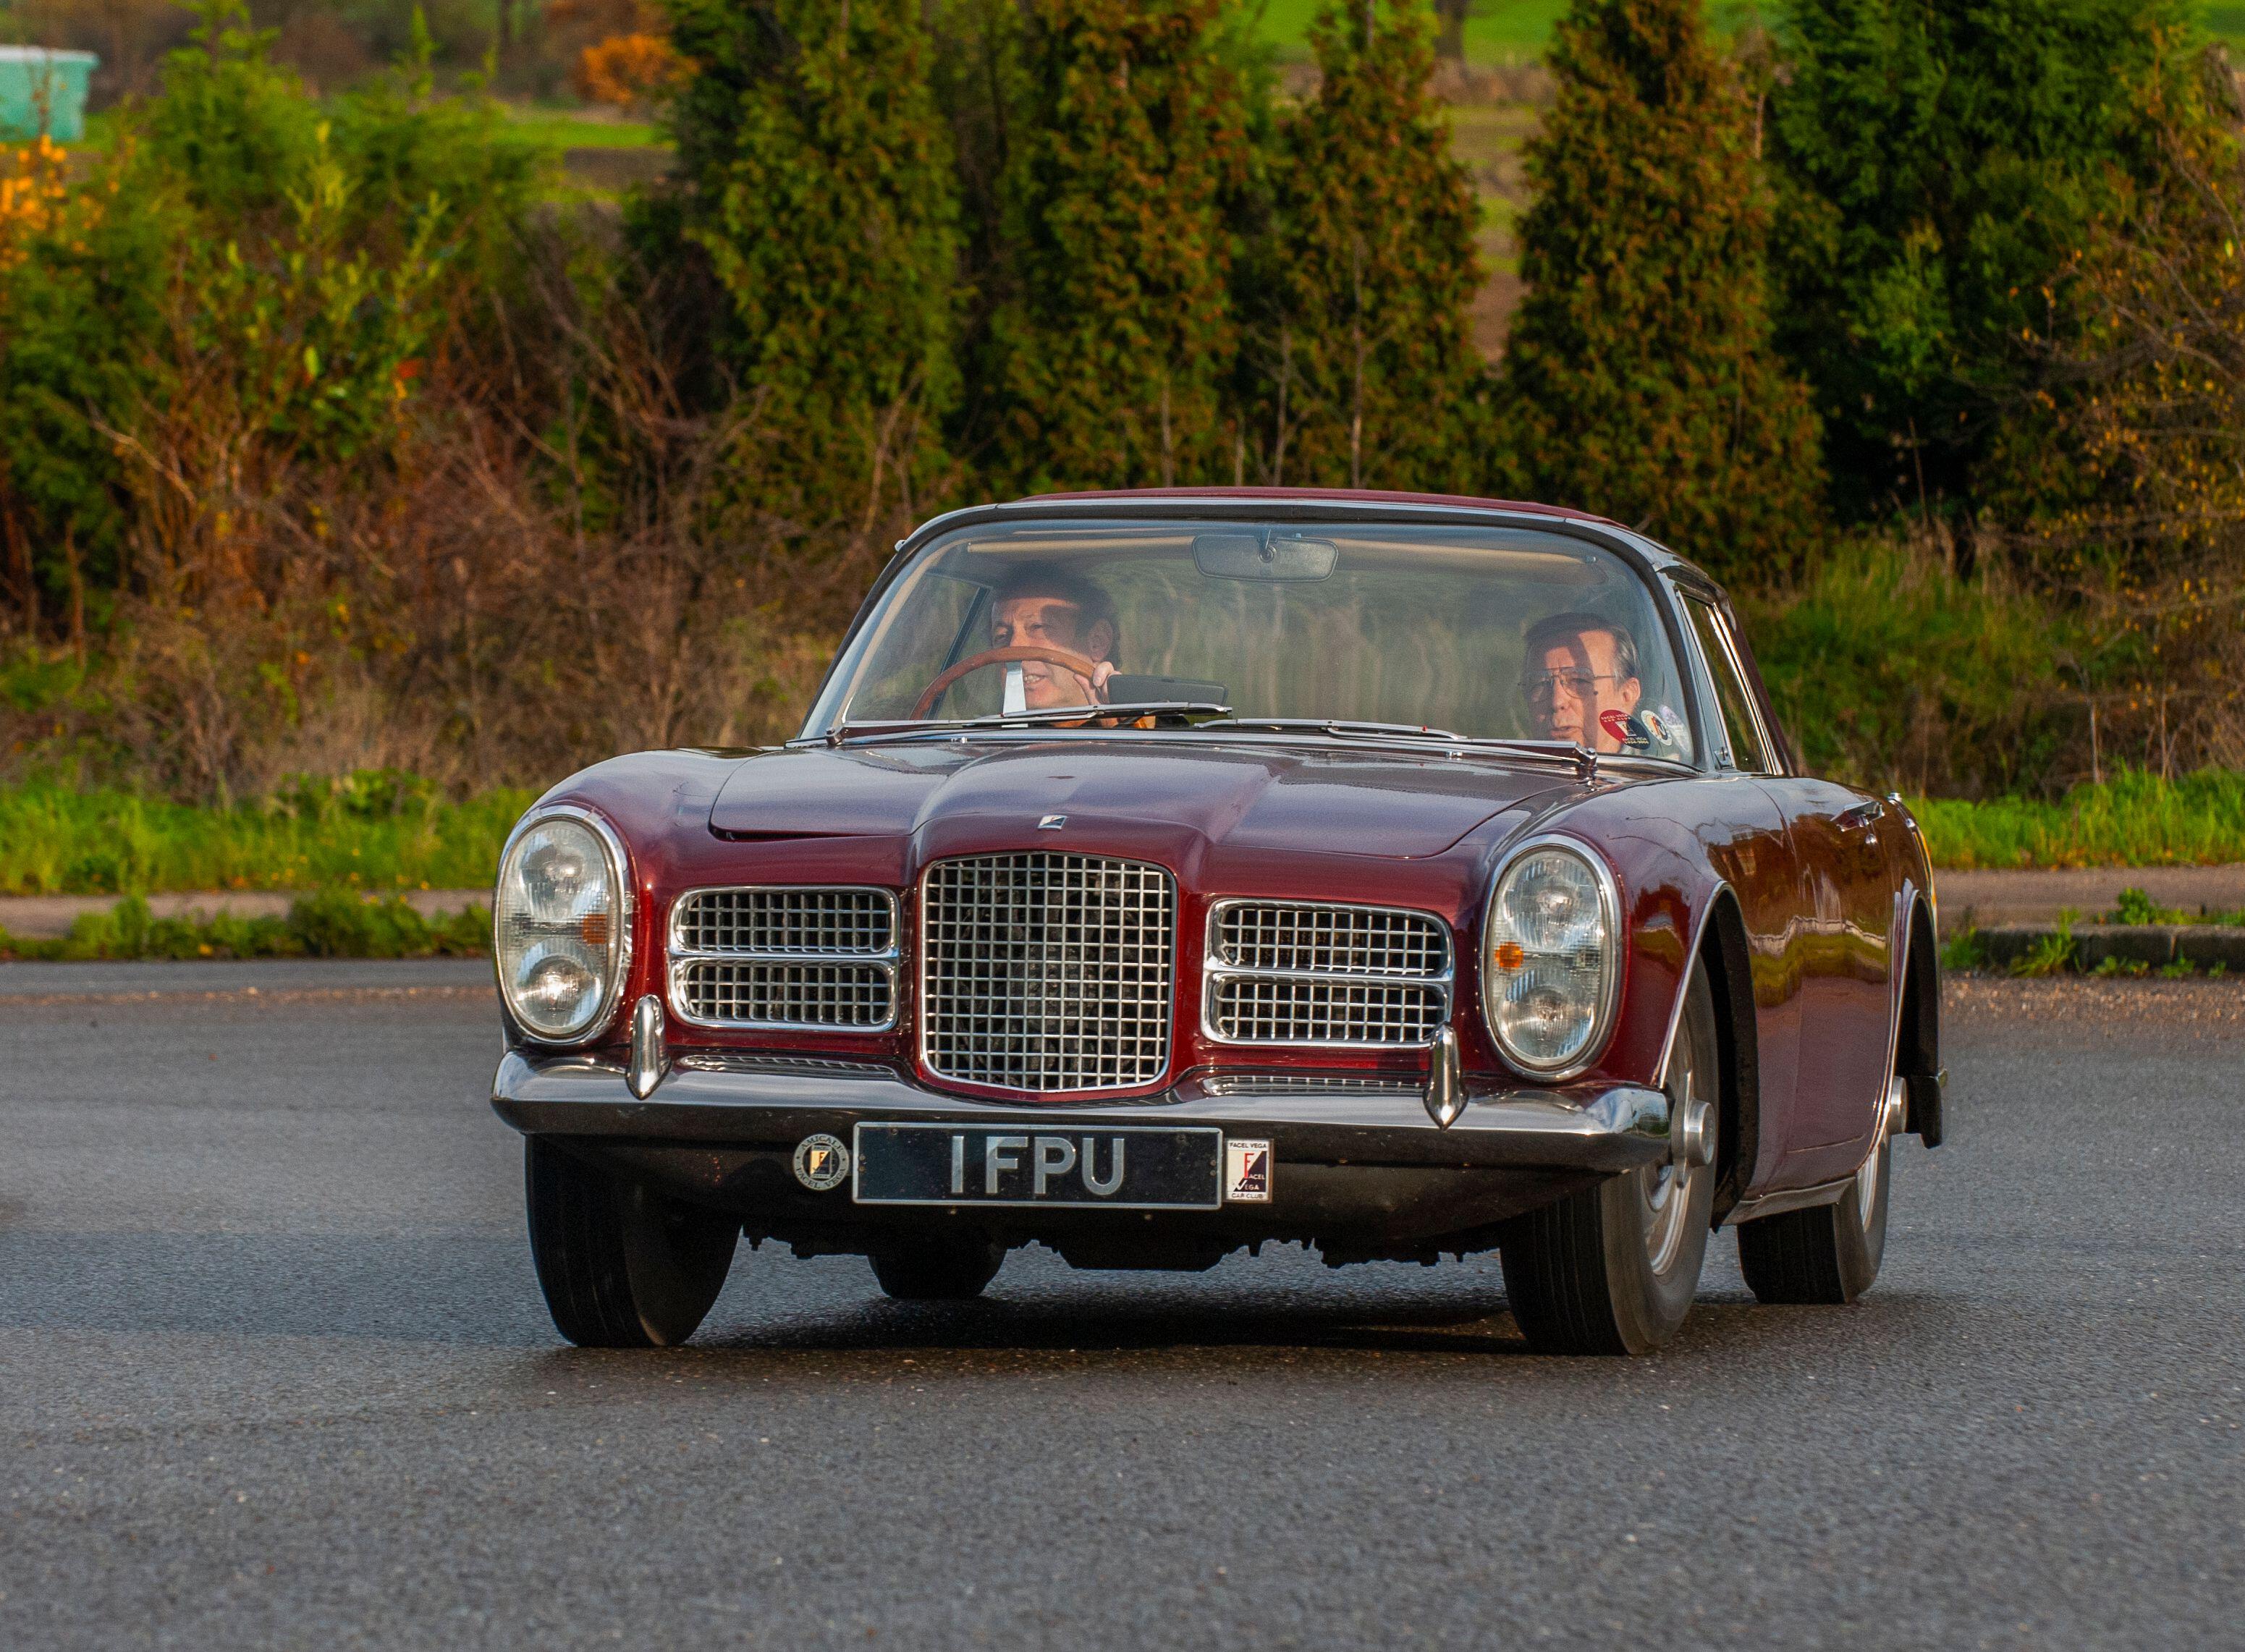 The Facel Vega 2 was the fastest four-door car in the world when he bought it in 1964